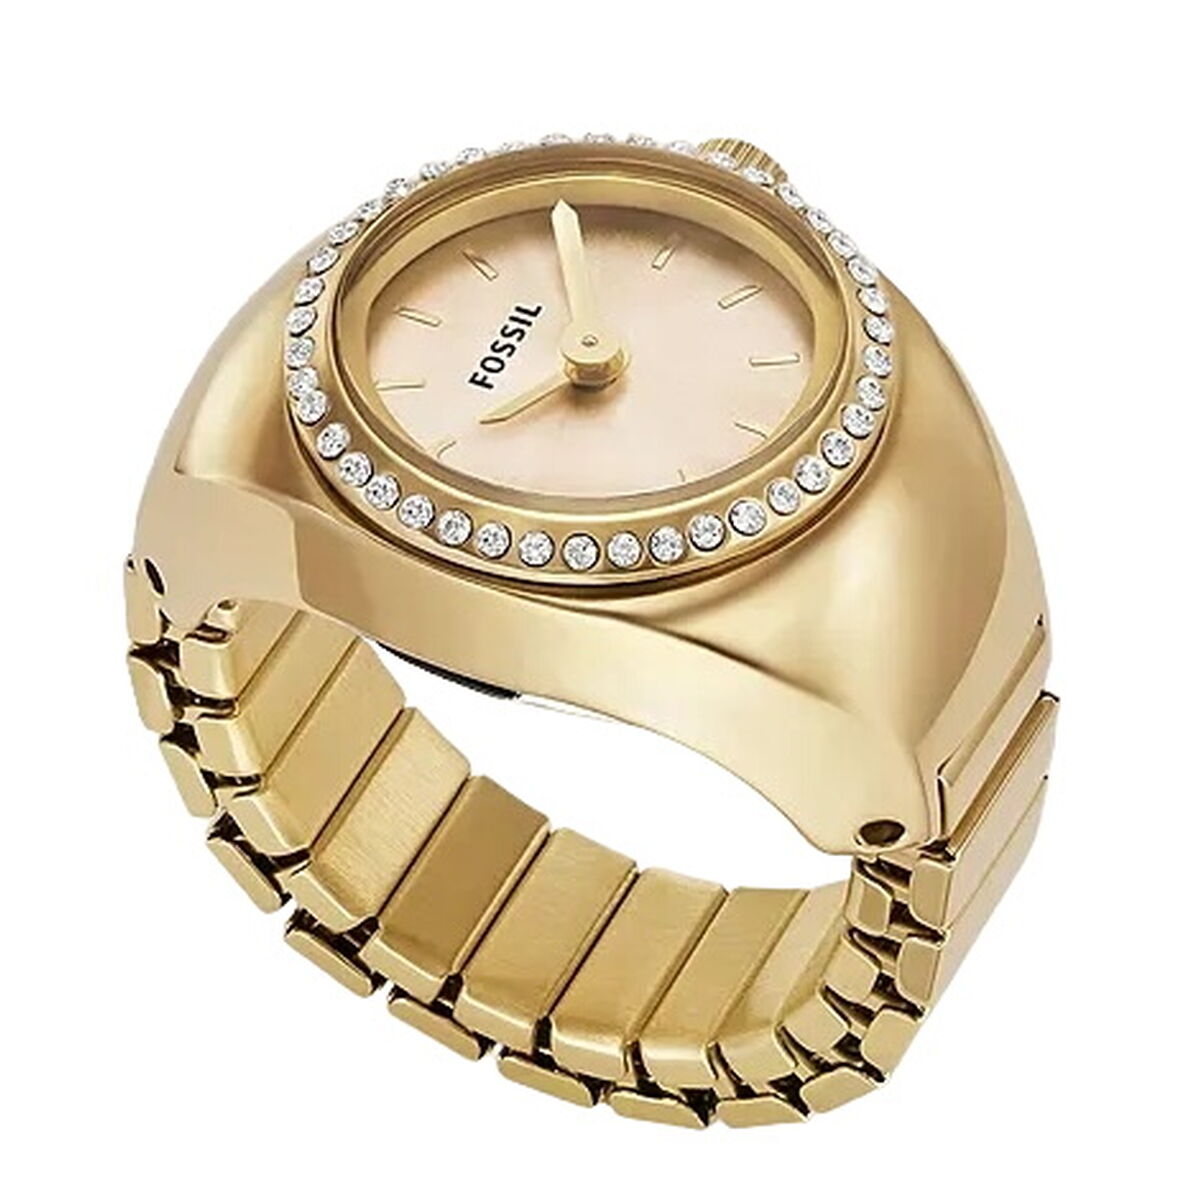 Horloge Dames Fossil WATCH RING - OROLOGIO AD ANELLO